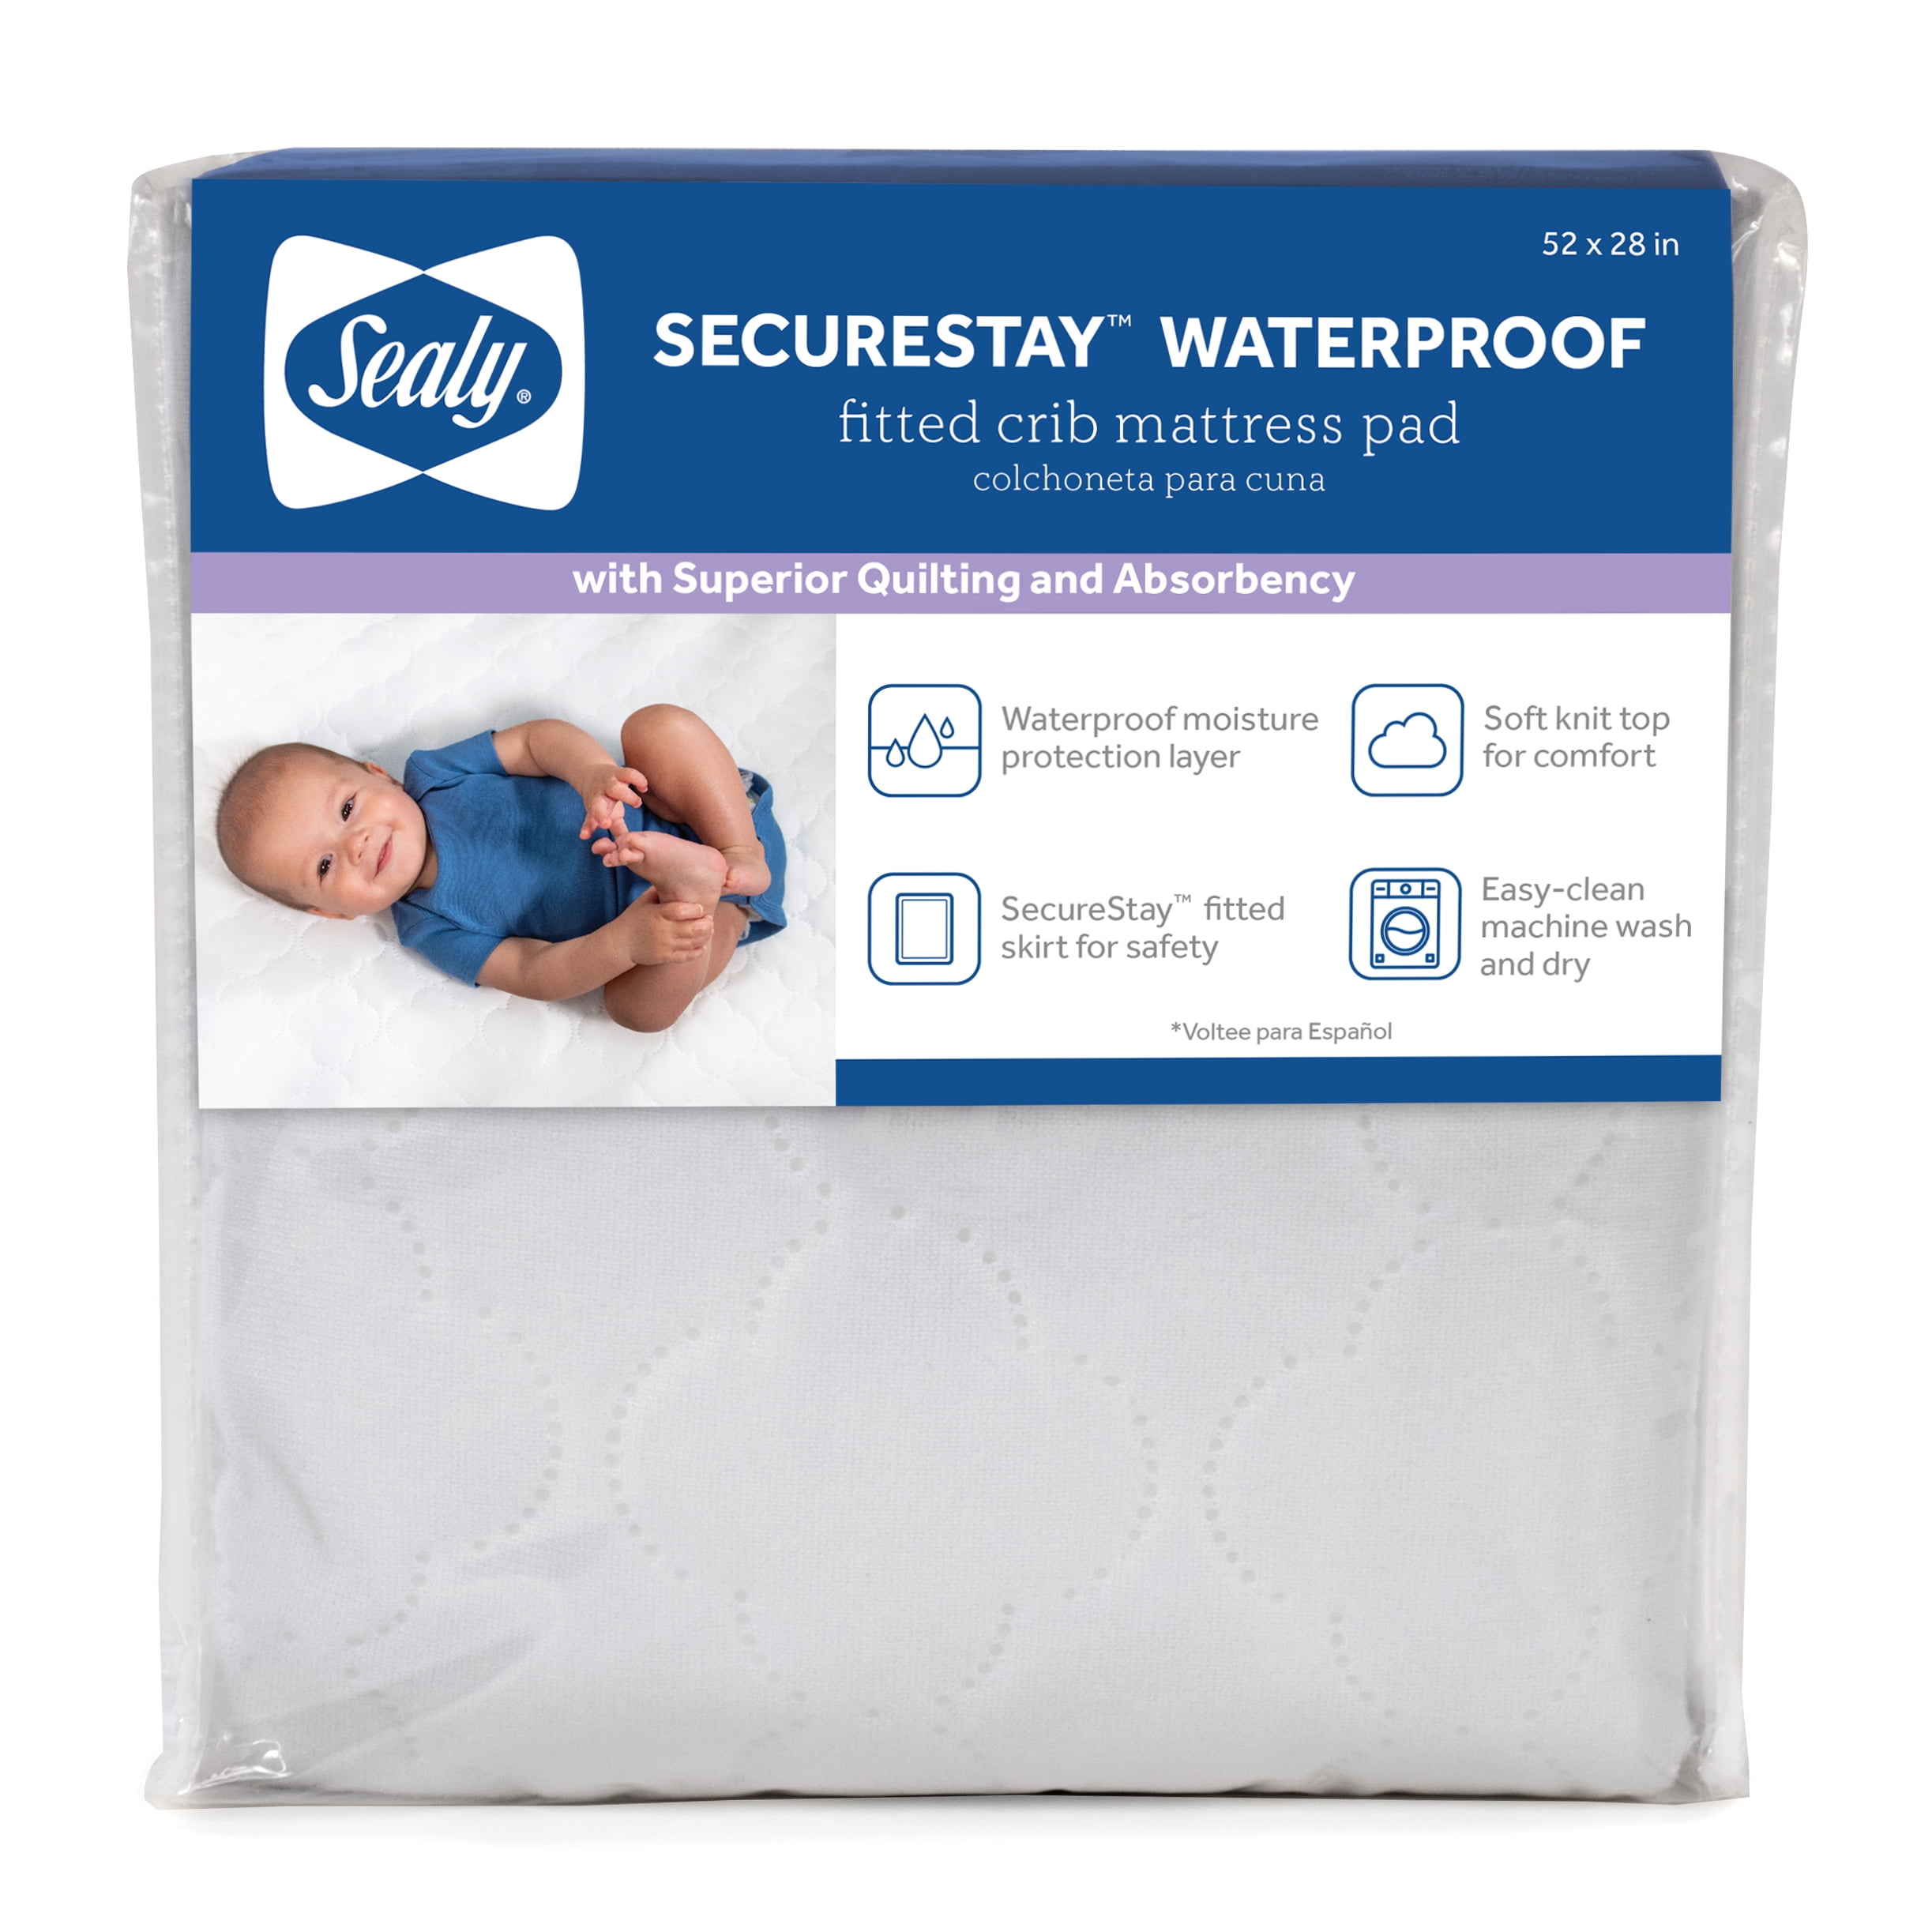 Sealy Allergy Protect Antimicrobial Waterproof Crib Mattress Pad